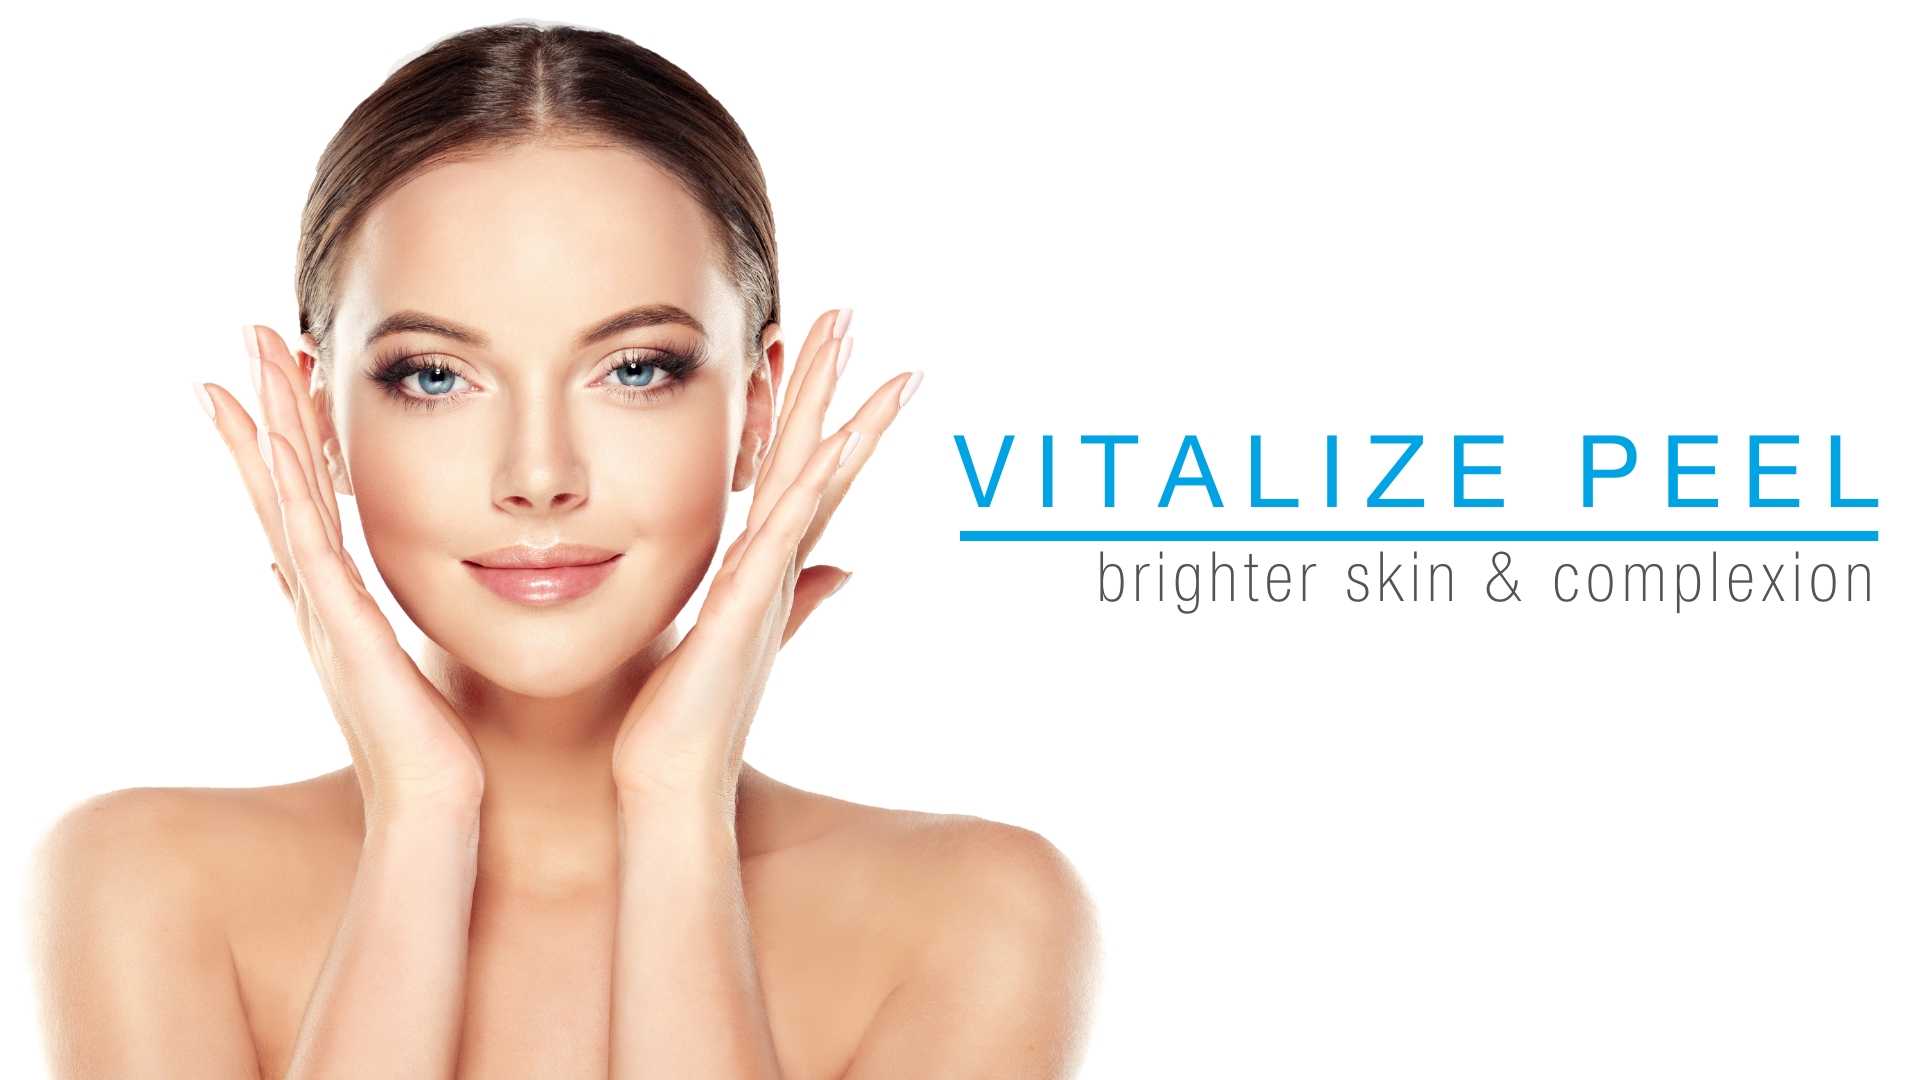 Woman with clear and glowing skin looks satisfied as she touches her face after a Vitalize Peel.